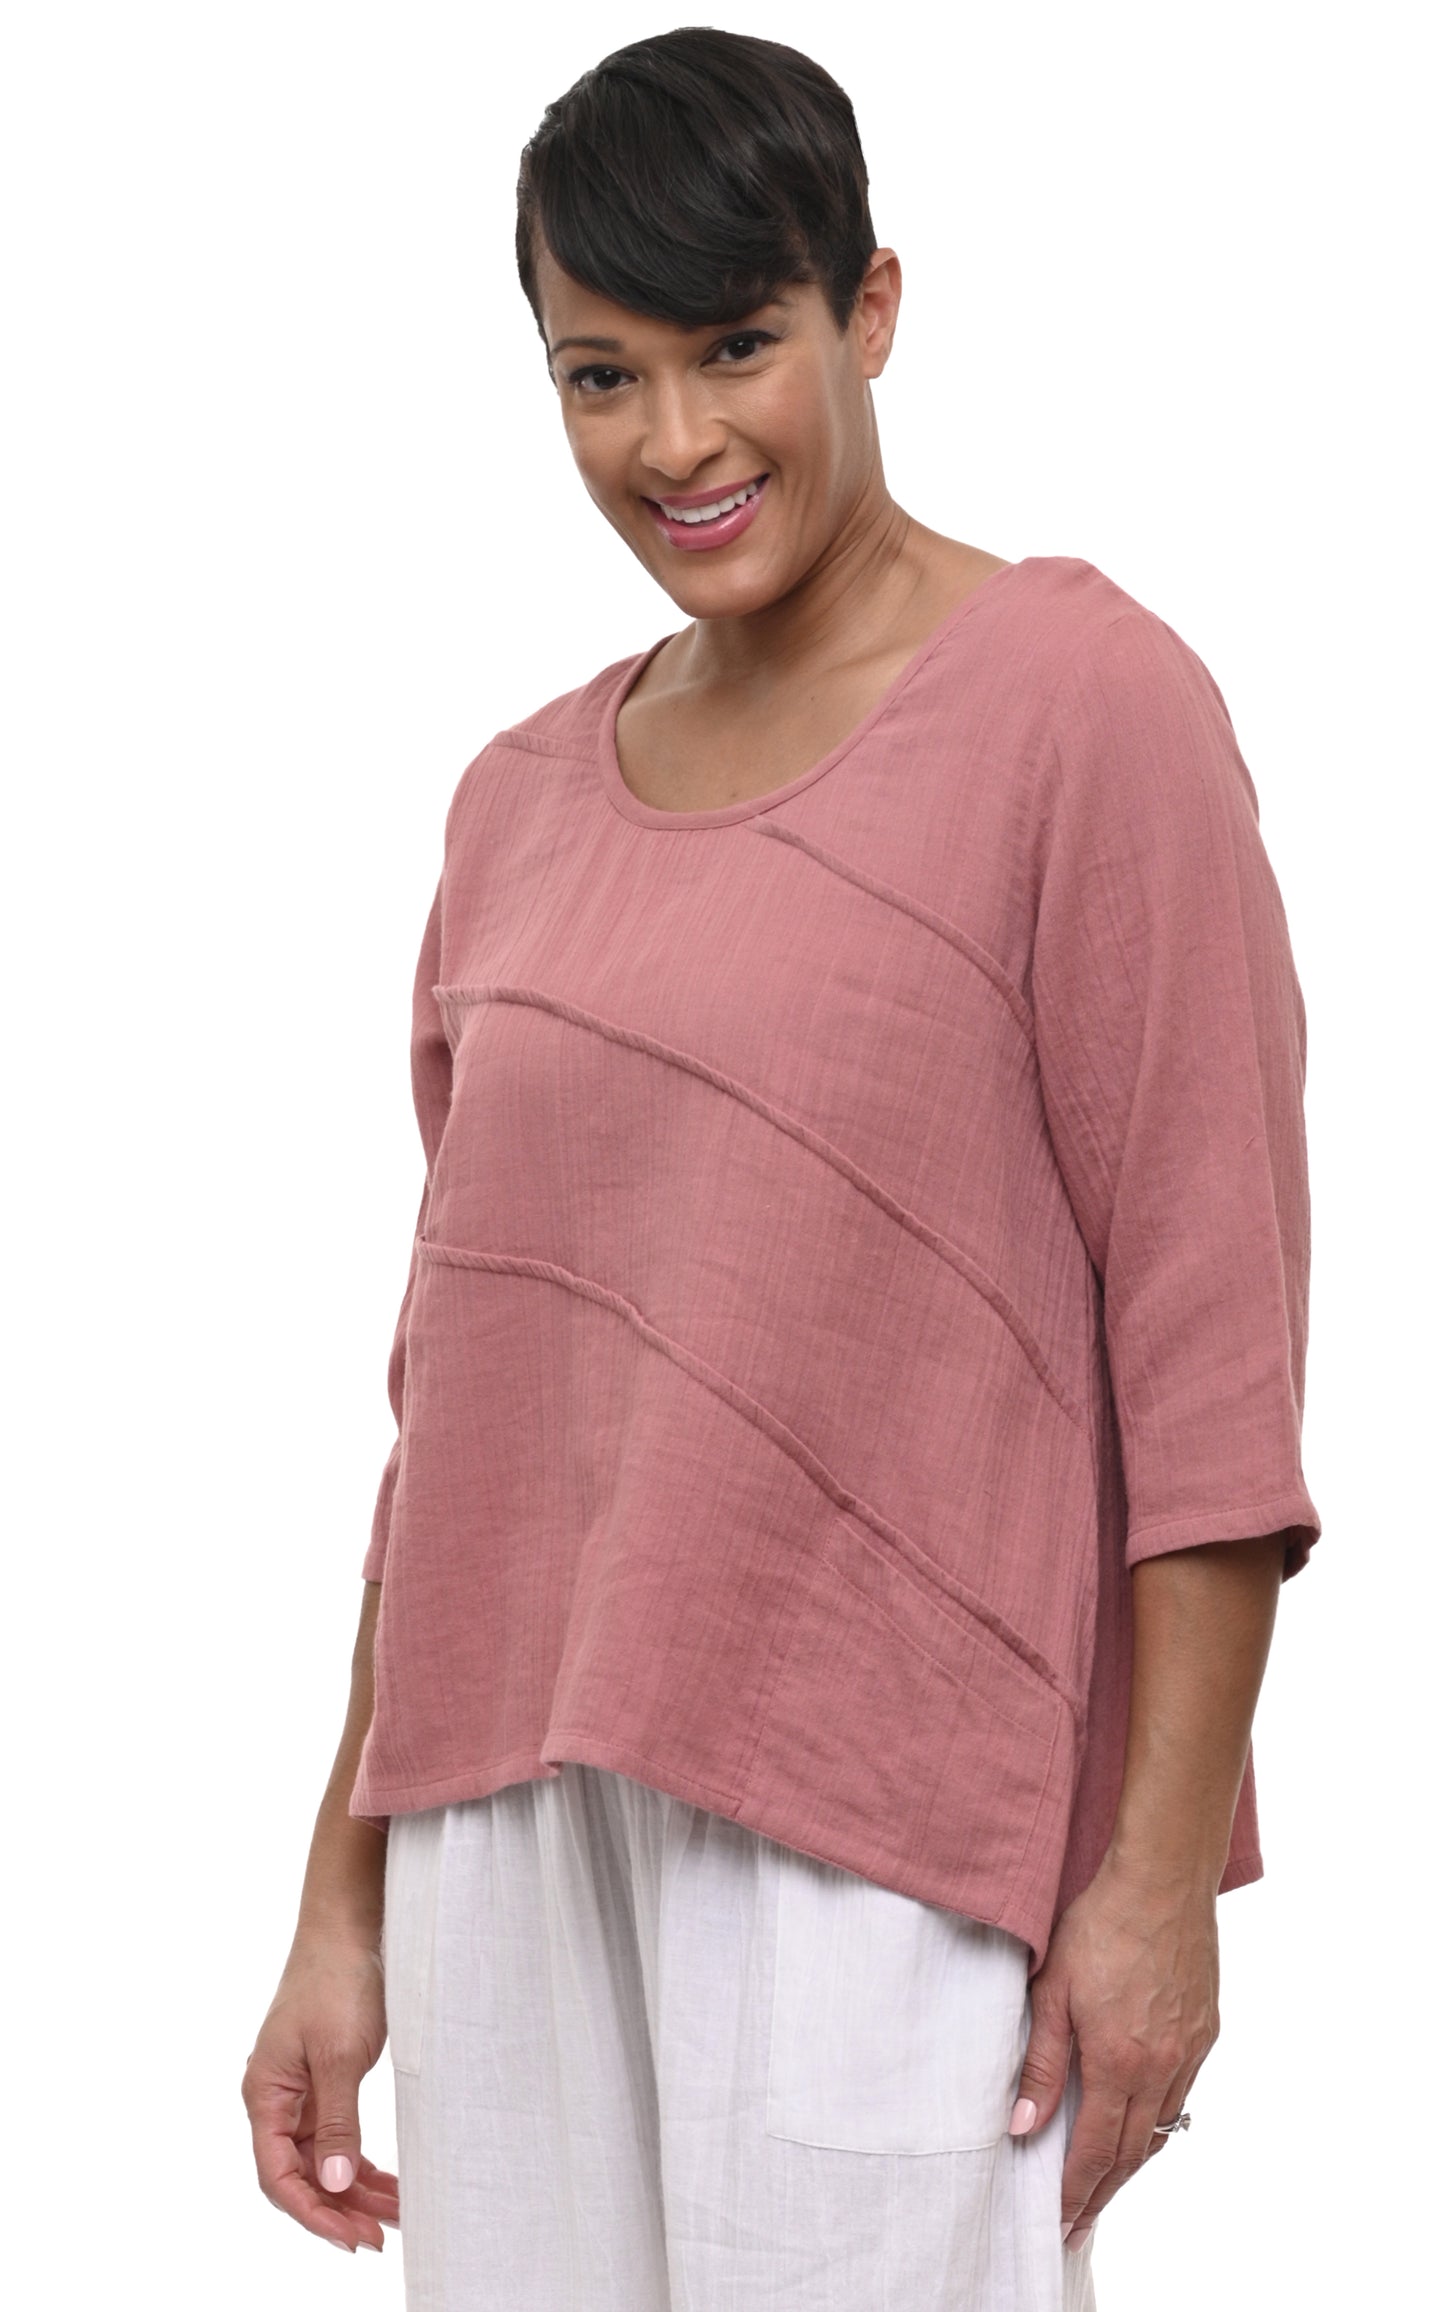 FINAL SALE VCG431 Adeline Pullover Top in Rose*